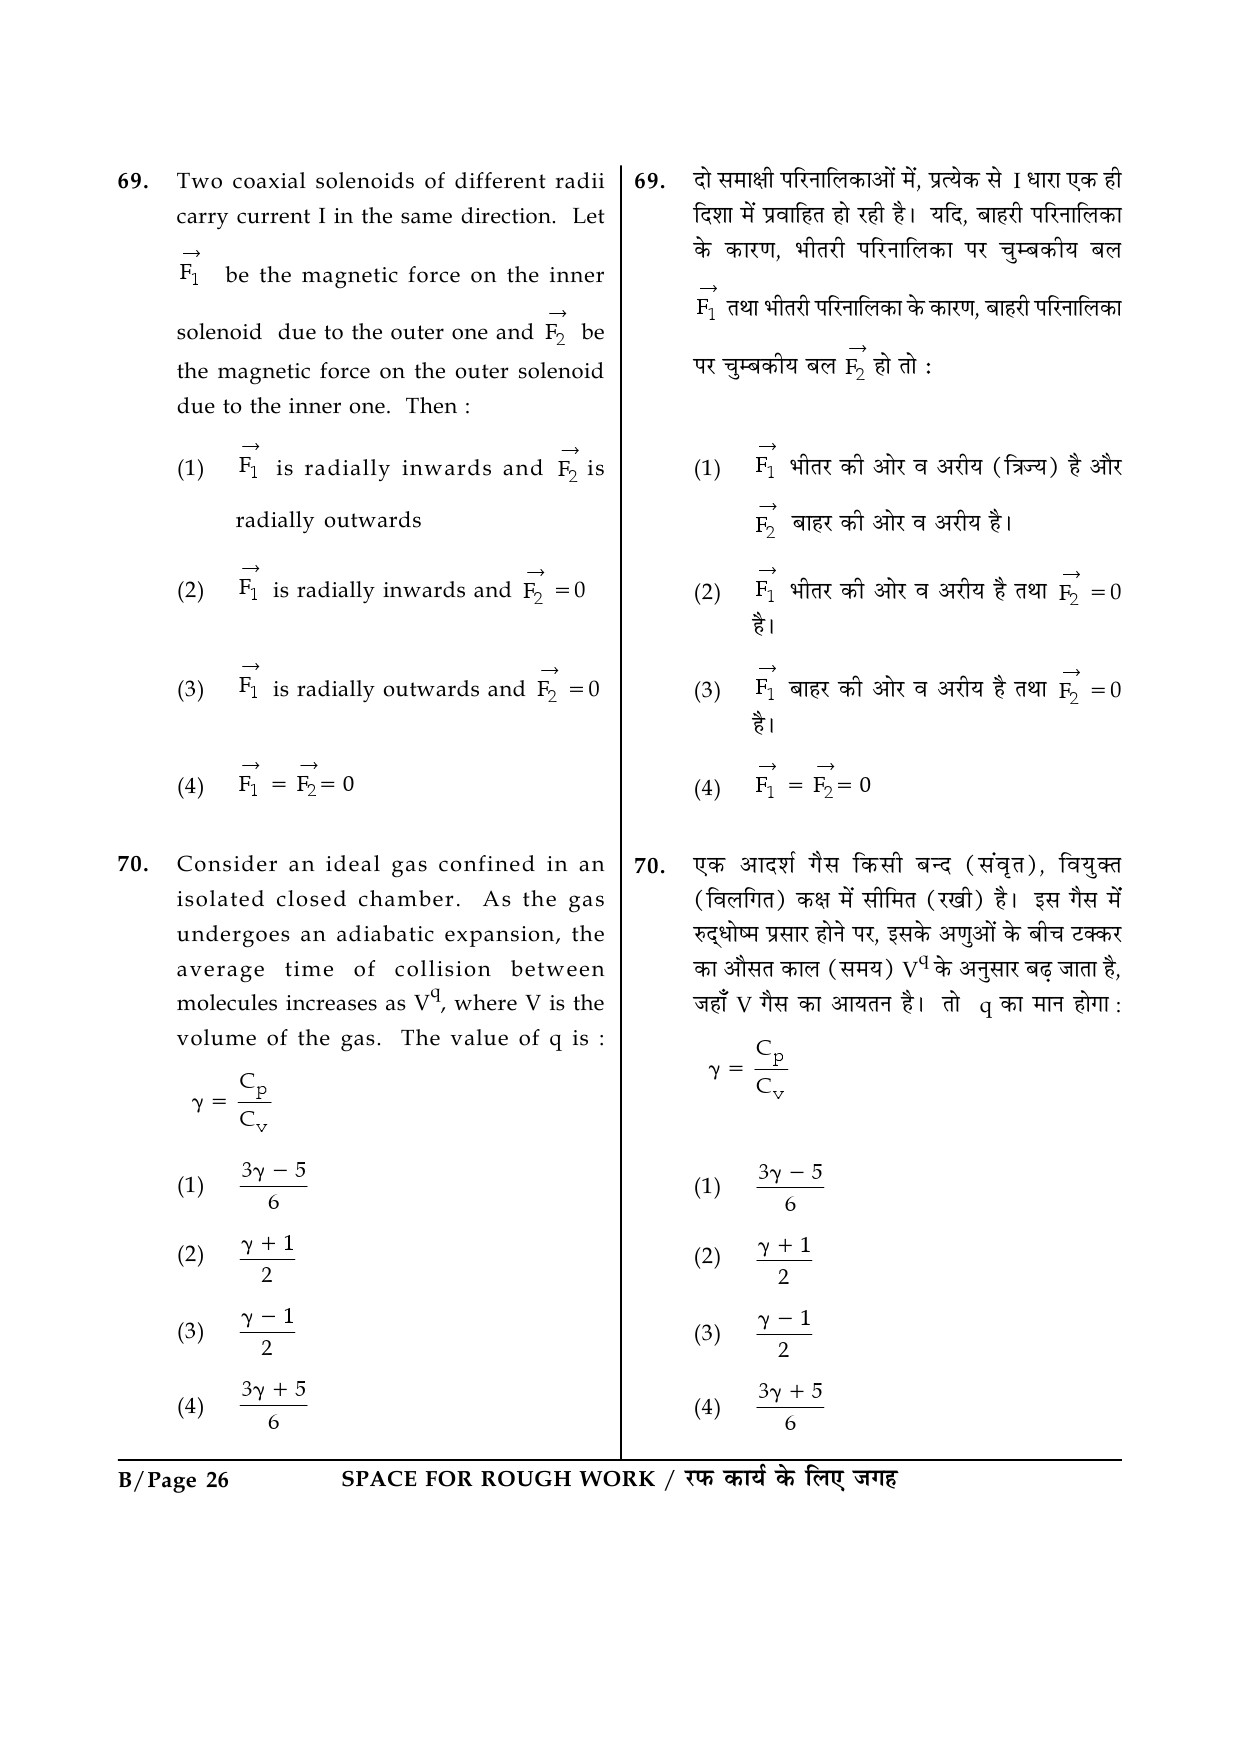 JEE Main Exam Question Paper 2015 Booklet B 26